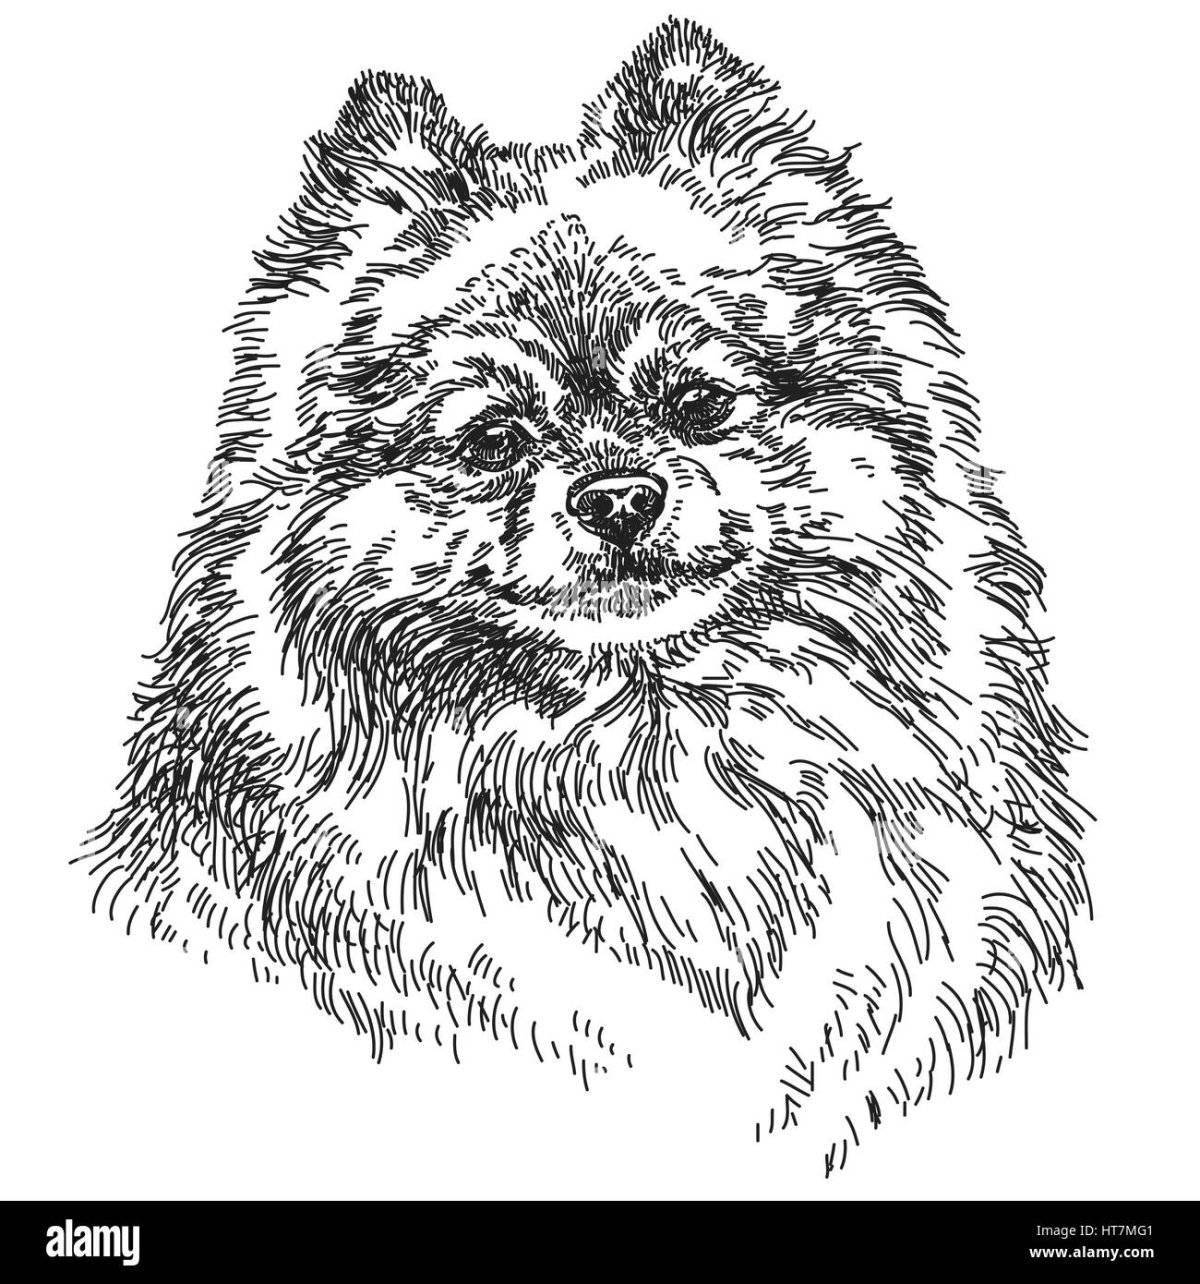 A fascinating drawing of a spitz